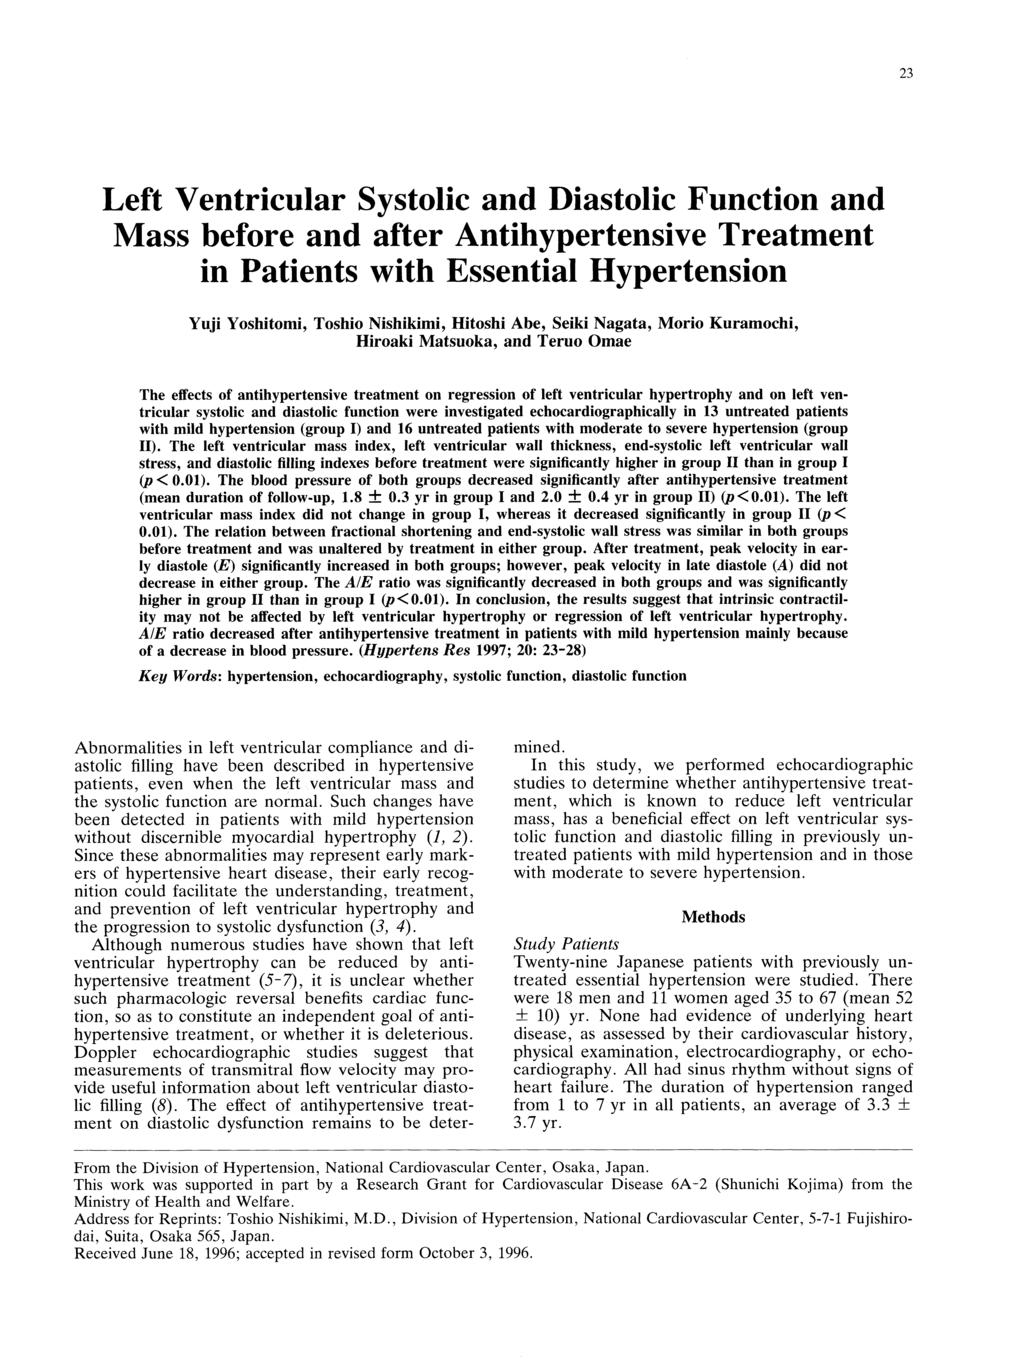 23 Left Ventricular Systolic and Diastolic Function and Mass before and after Antihypertensive Treatment in Patients with Essential Hypertension Yuji Yoshitomi, Toshio Nishikimi, Hitoshi Abe, Seiki